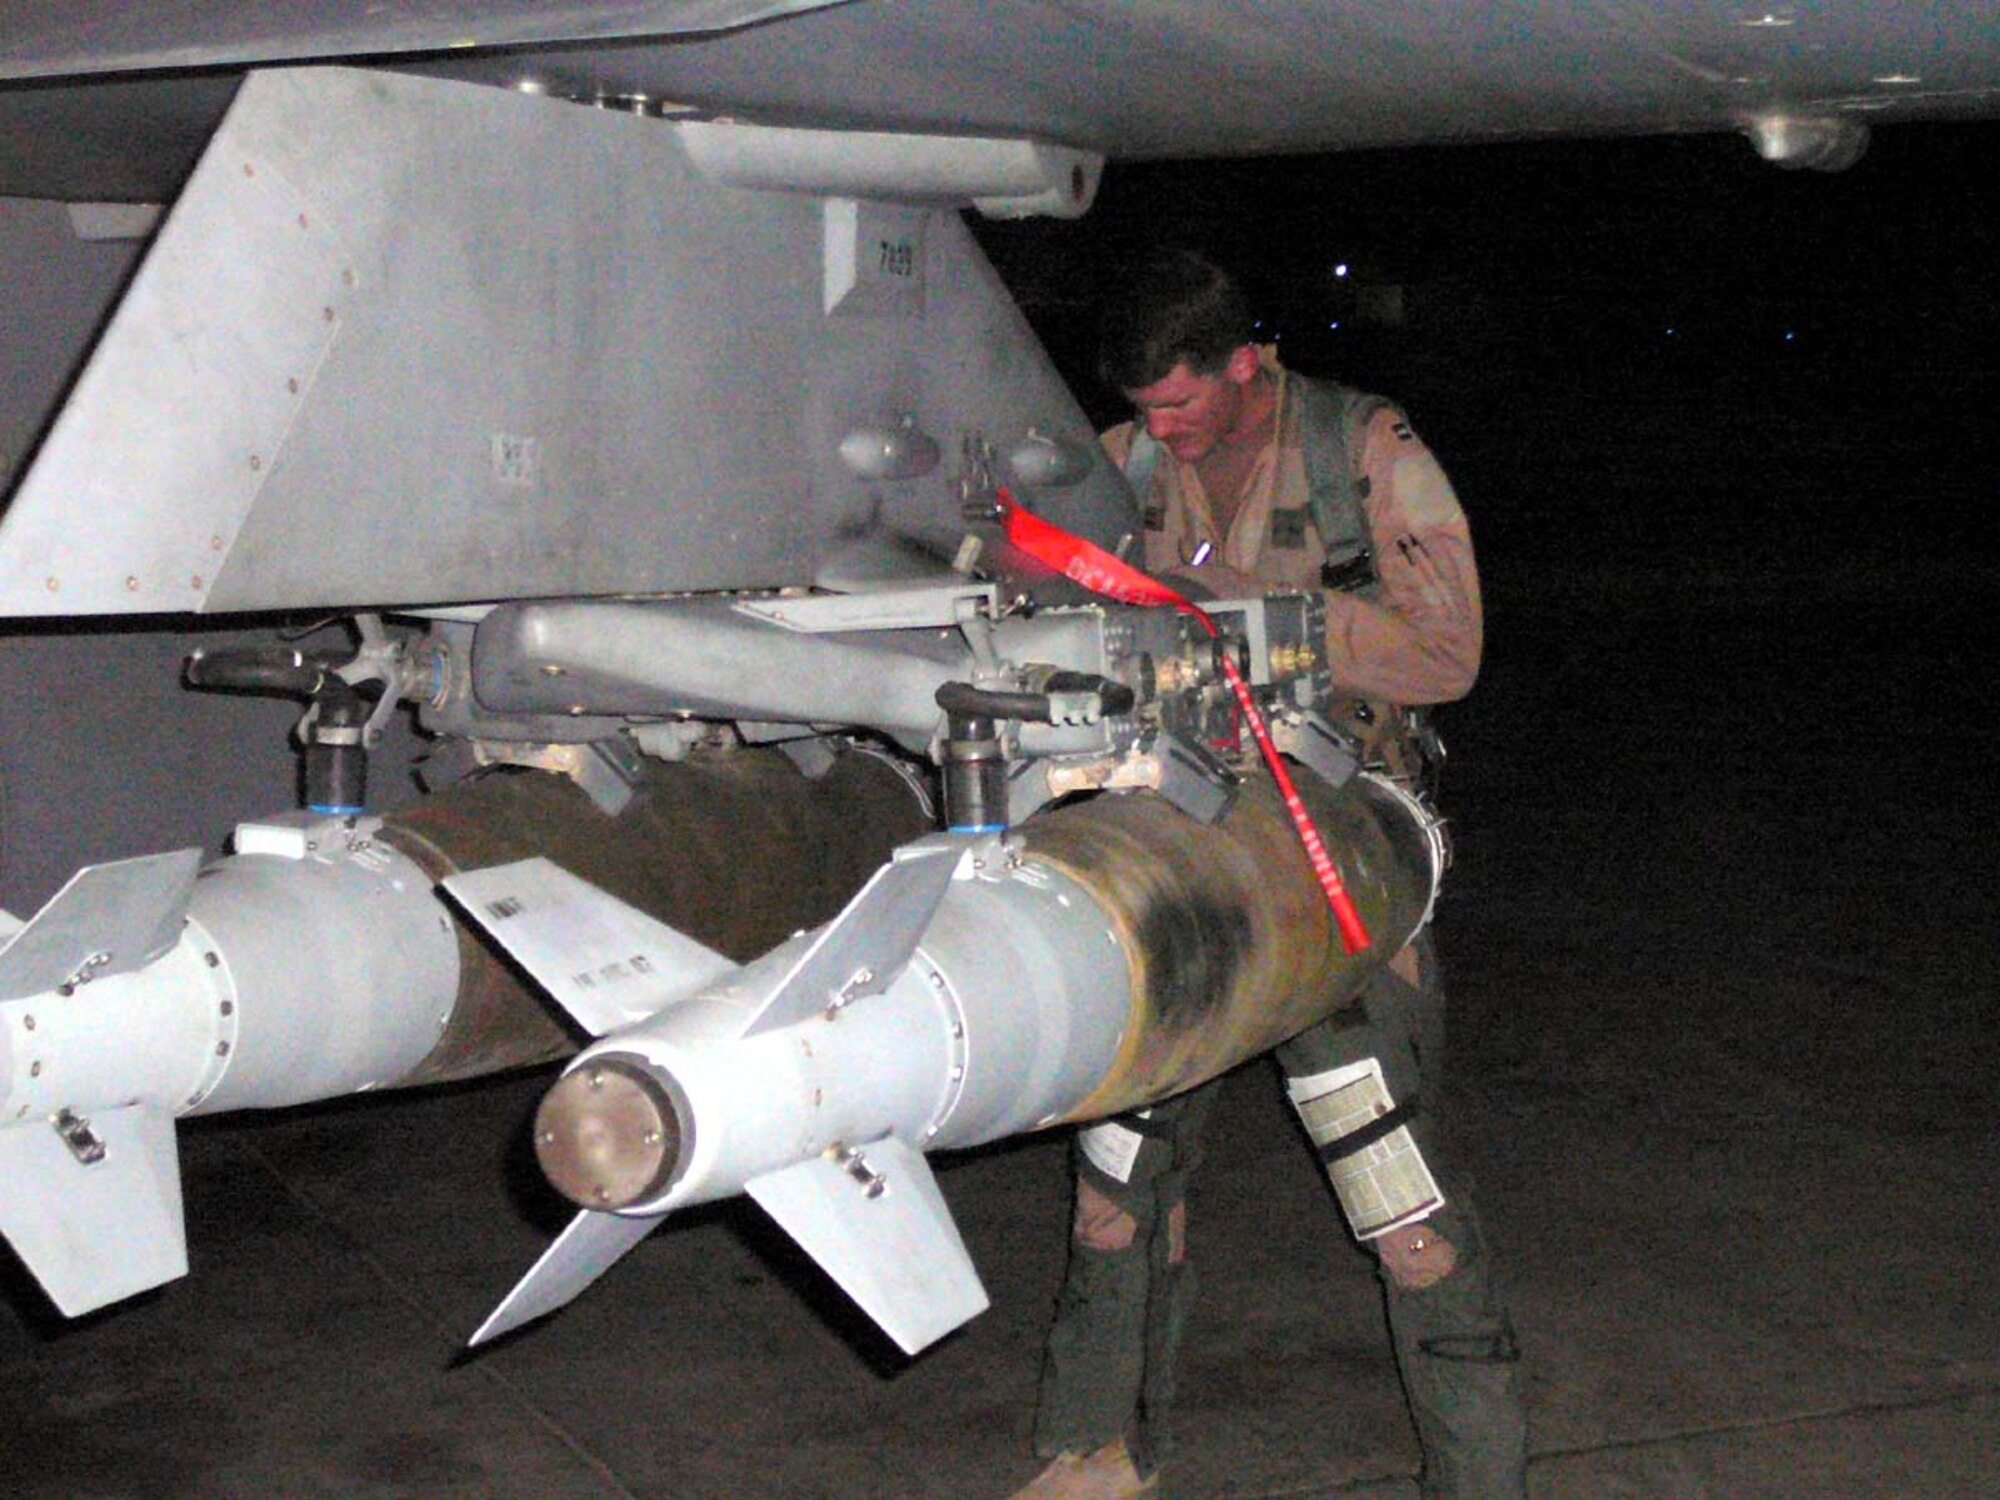 BALAD AIR BASE, Iraq -- Capt. Pete Schnobrich, 13th Expeditionary Fighter Squadron flight commander, preflights his GBU-38 Inertially Aided Munitions for a night sortie and his 100th combat mission in Operation Iraqi Freedom.  Captain Schnobrich previously flew OIF missions as part of the 421st EFS from Hill AFB in 2005. ((U.S. Air Force photo)
